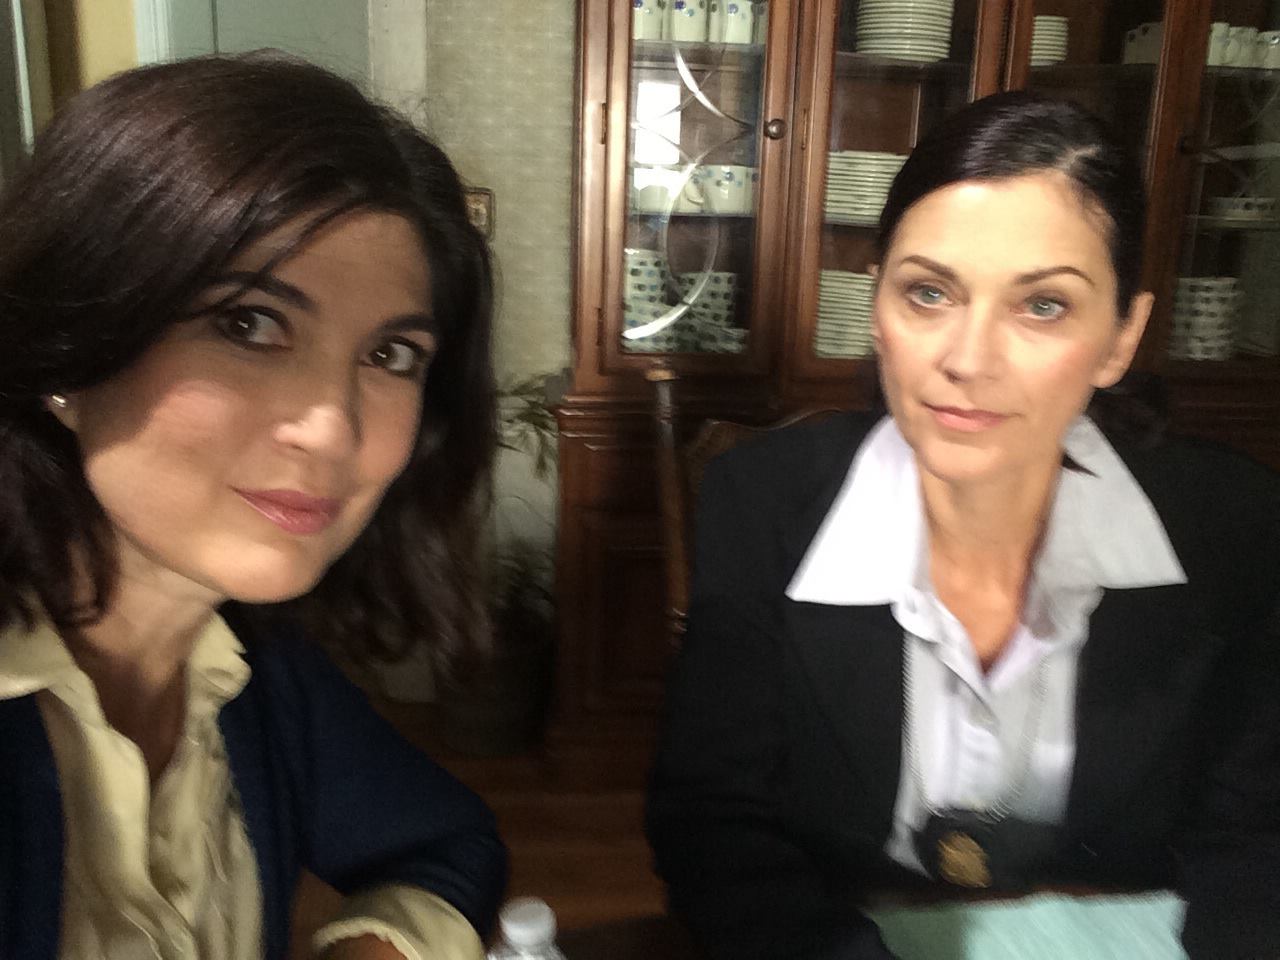 Selfie with Caroline Redekopp in Tabloid 2, which airs early 2015 on the Investigative Discovery channel.